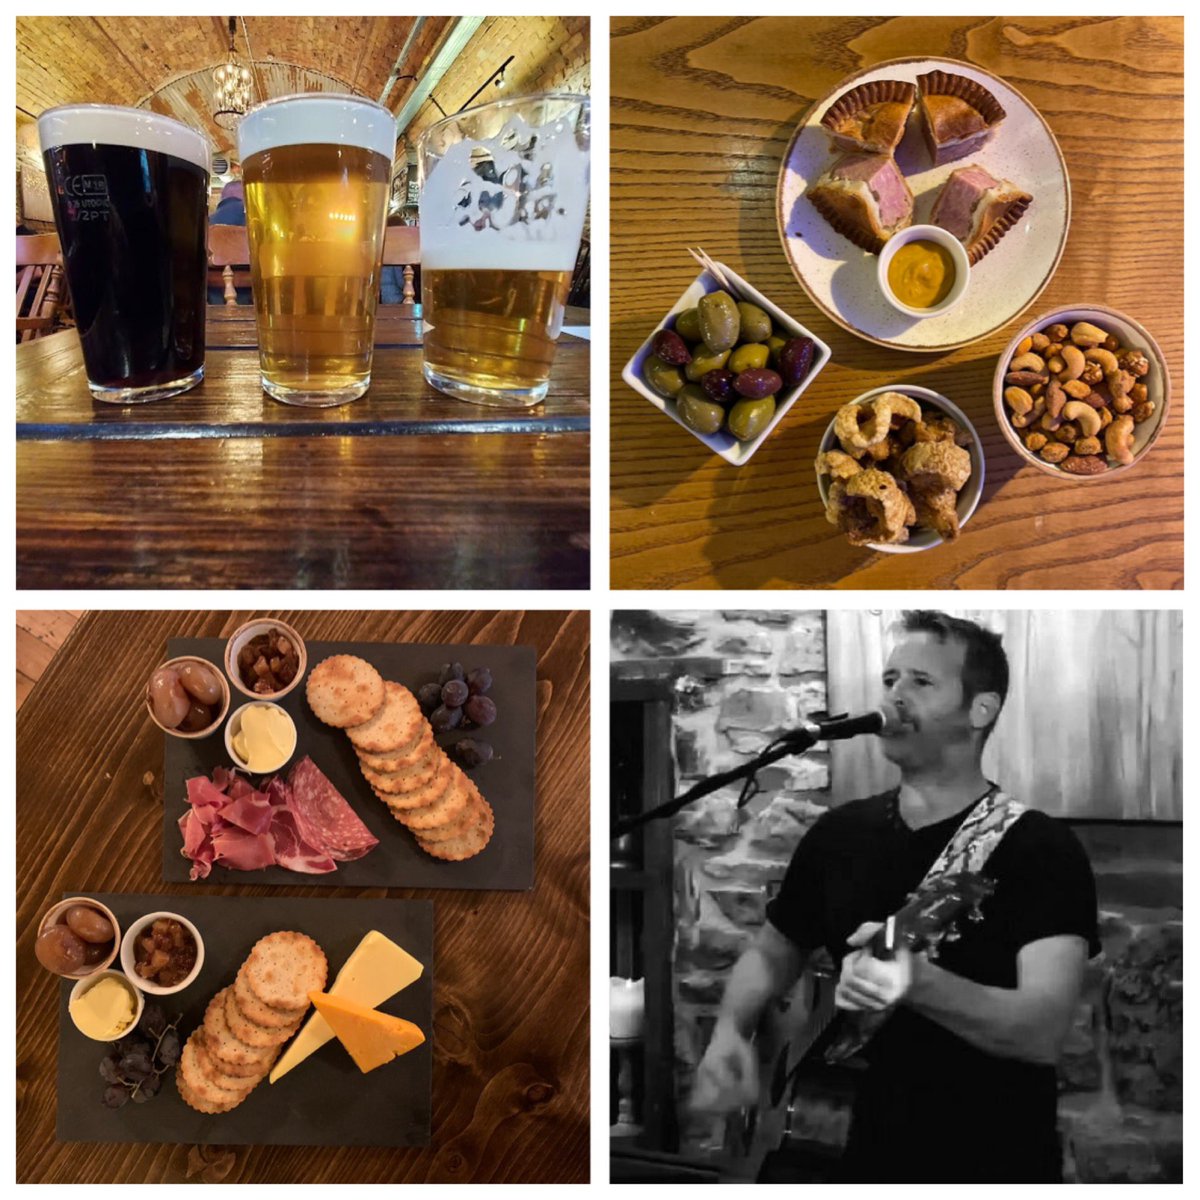 🍻HAPPY FATHER’S DAY🍻 Come treat your dads to their favourite pint and one of our delicious bar snack whilst chilling out to the sounds of Steve Cat, starting at 2pm🎸 #fathersday #dadsday #fathers #dads #livemusic #beeroclock #realale #microbar #vaults #boltonvaults #bolton